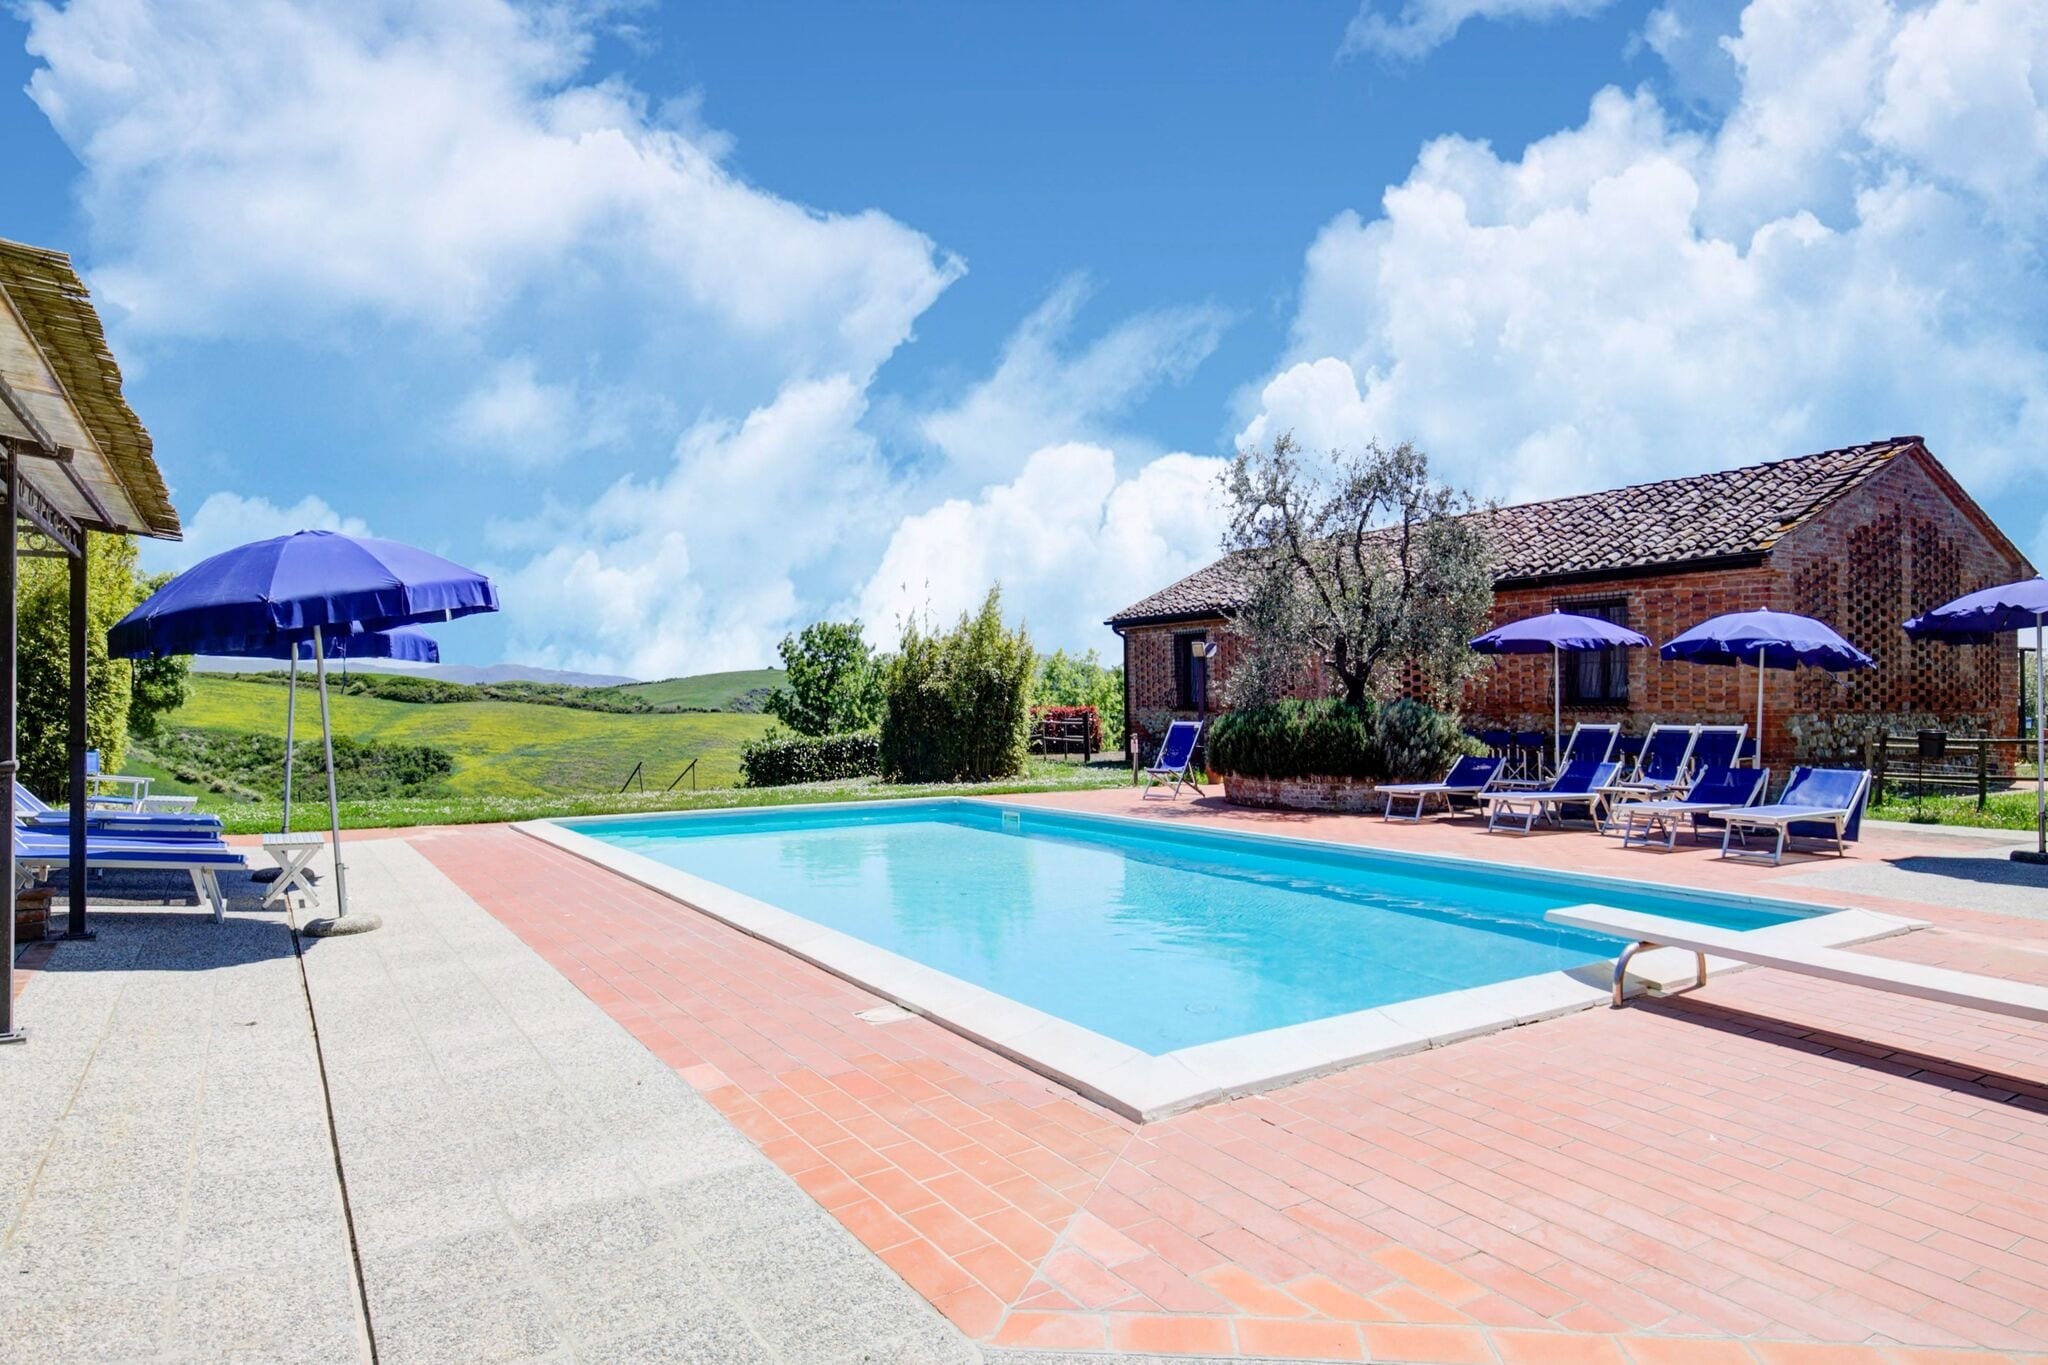 Apartment in a typical Tuscan farmhouse with swimming pool